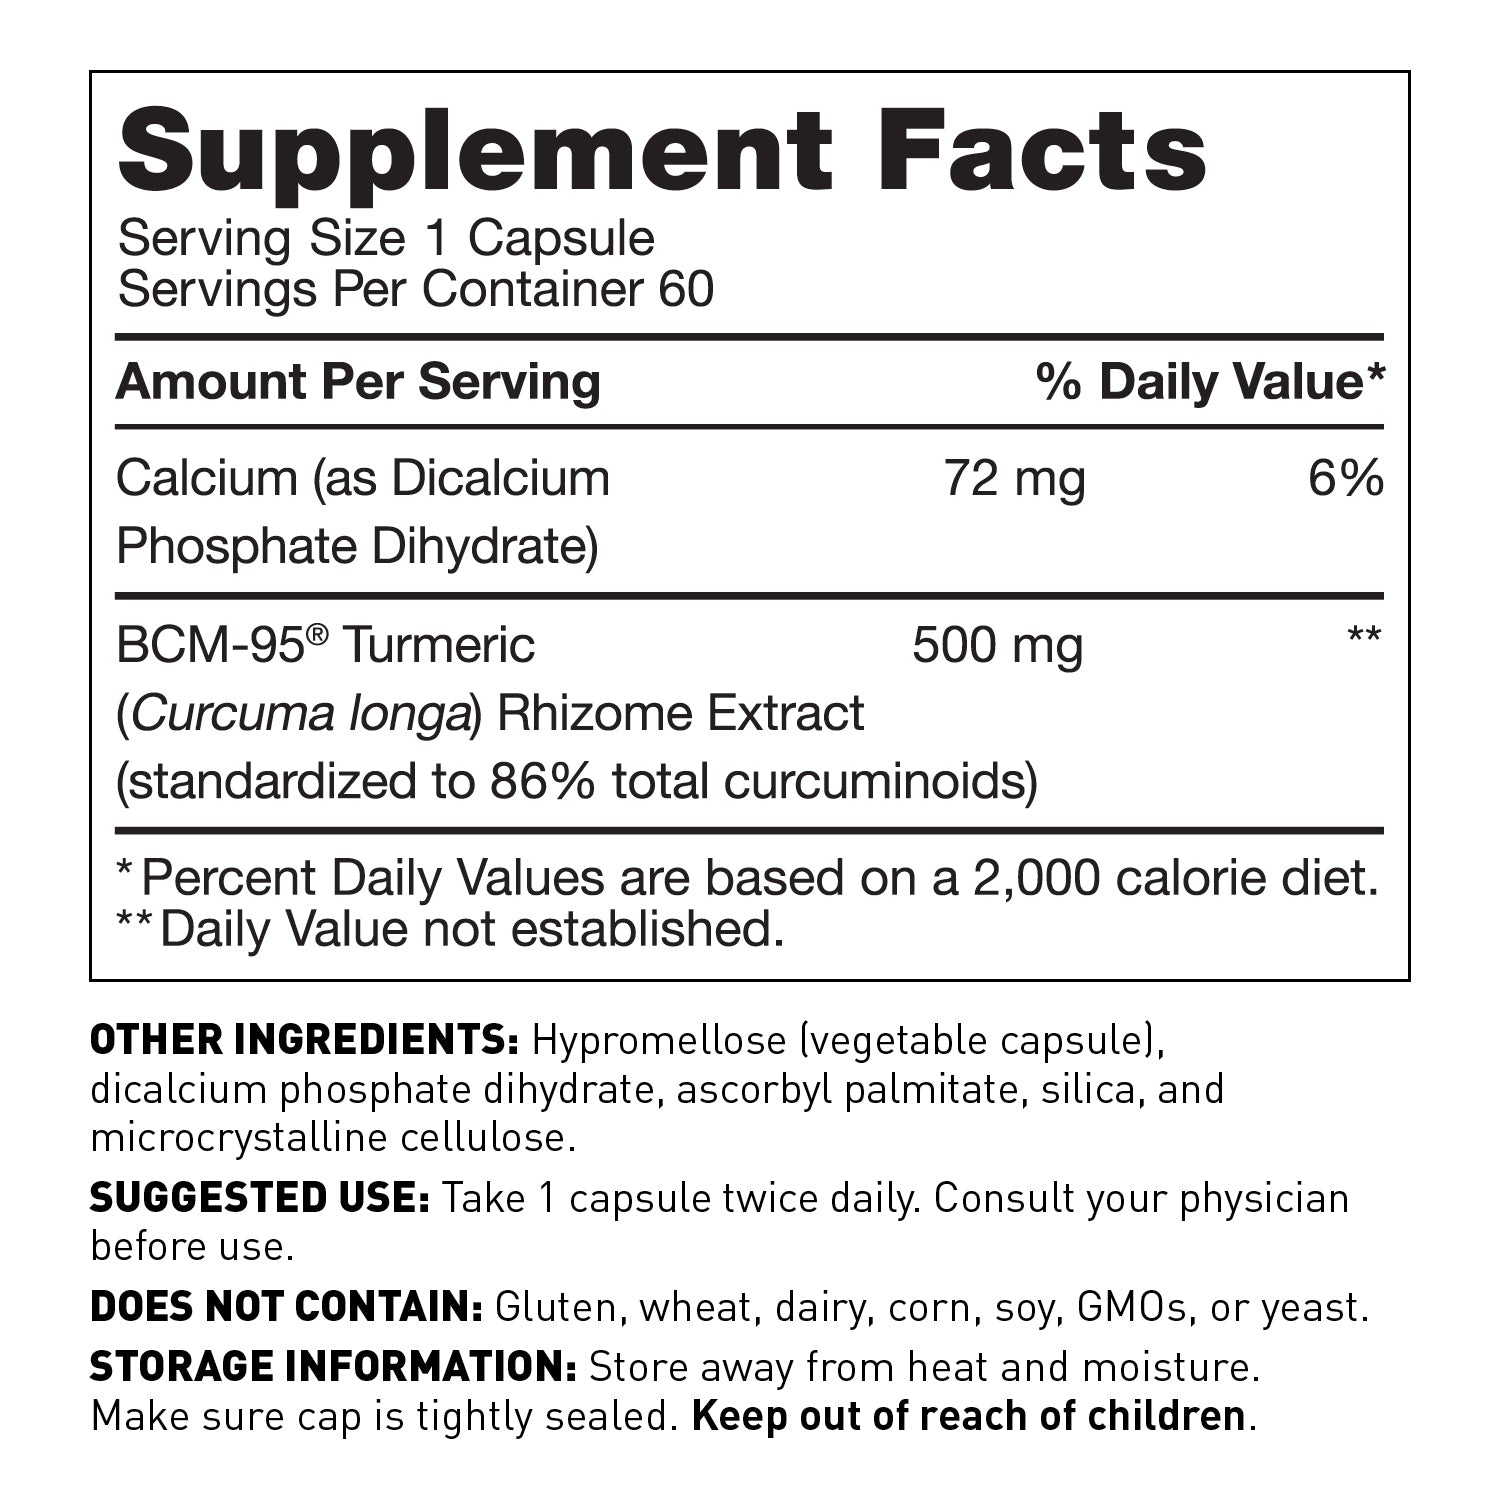 Curcumin Super Soluble - 60 Capsules | Amy Myers MD